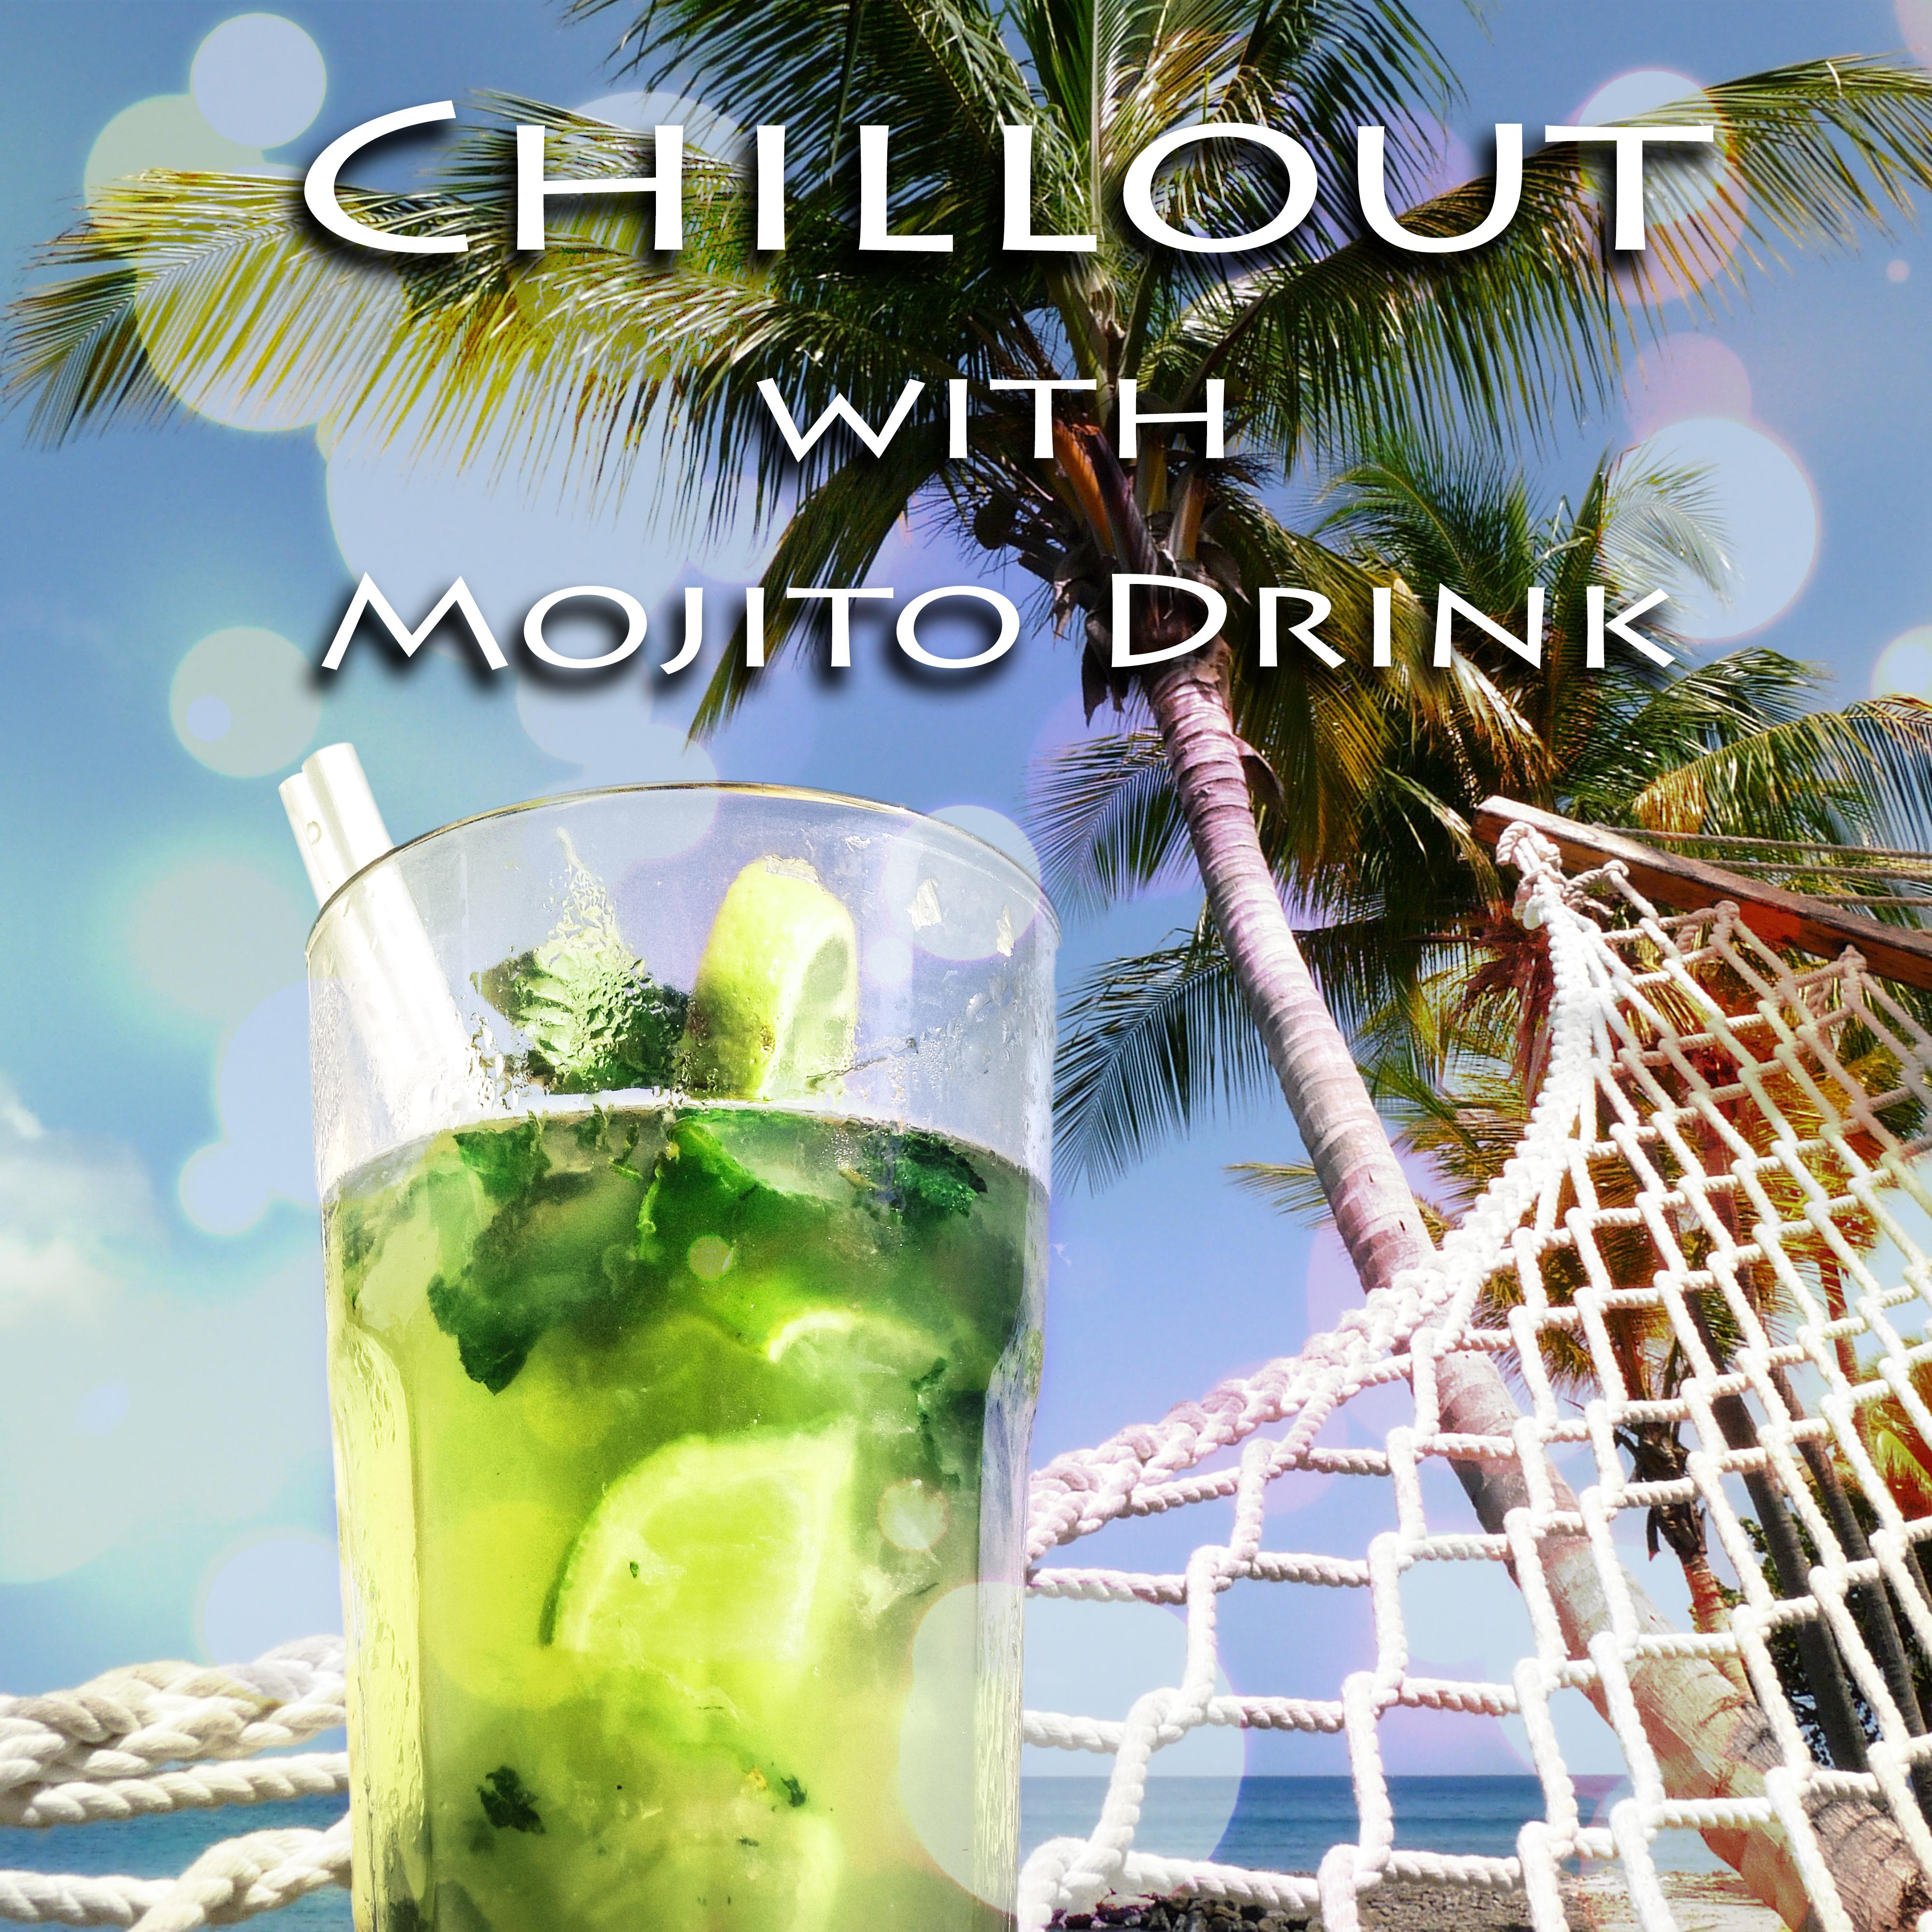 Chillout with Mojito Drink – Cool Summer Chillout Music, Summertime Beach Party Electronic Music, Chillout Session with **** Music, Summer Time Relaxation on Miami Beach, Spring Break Ibiza Lounge